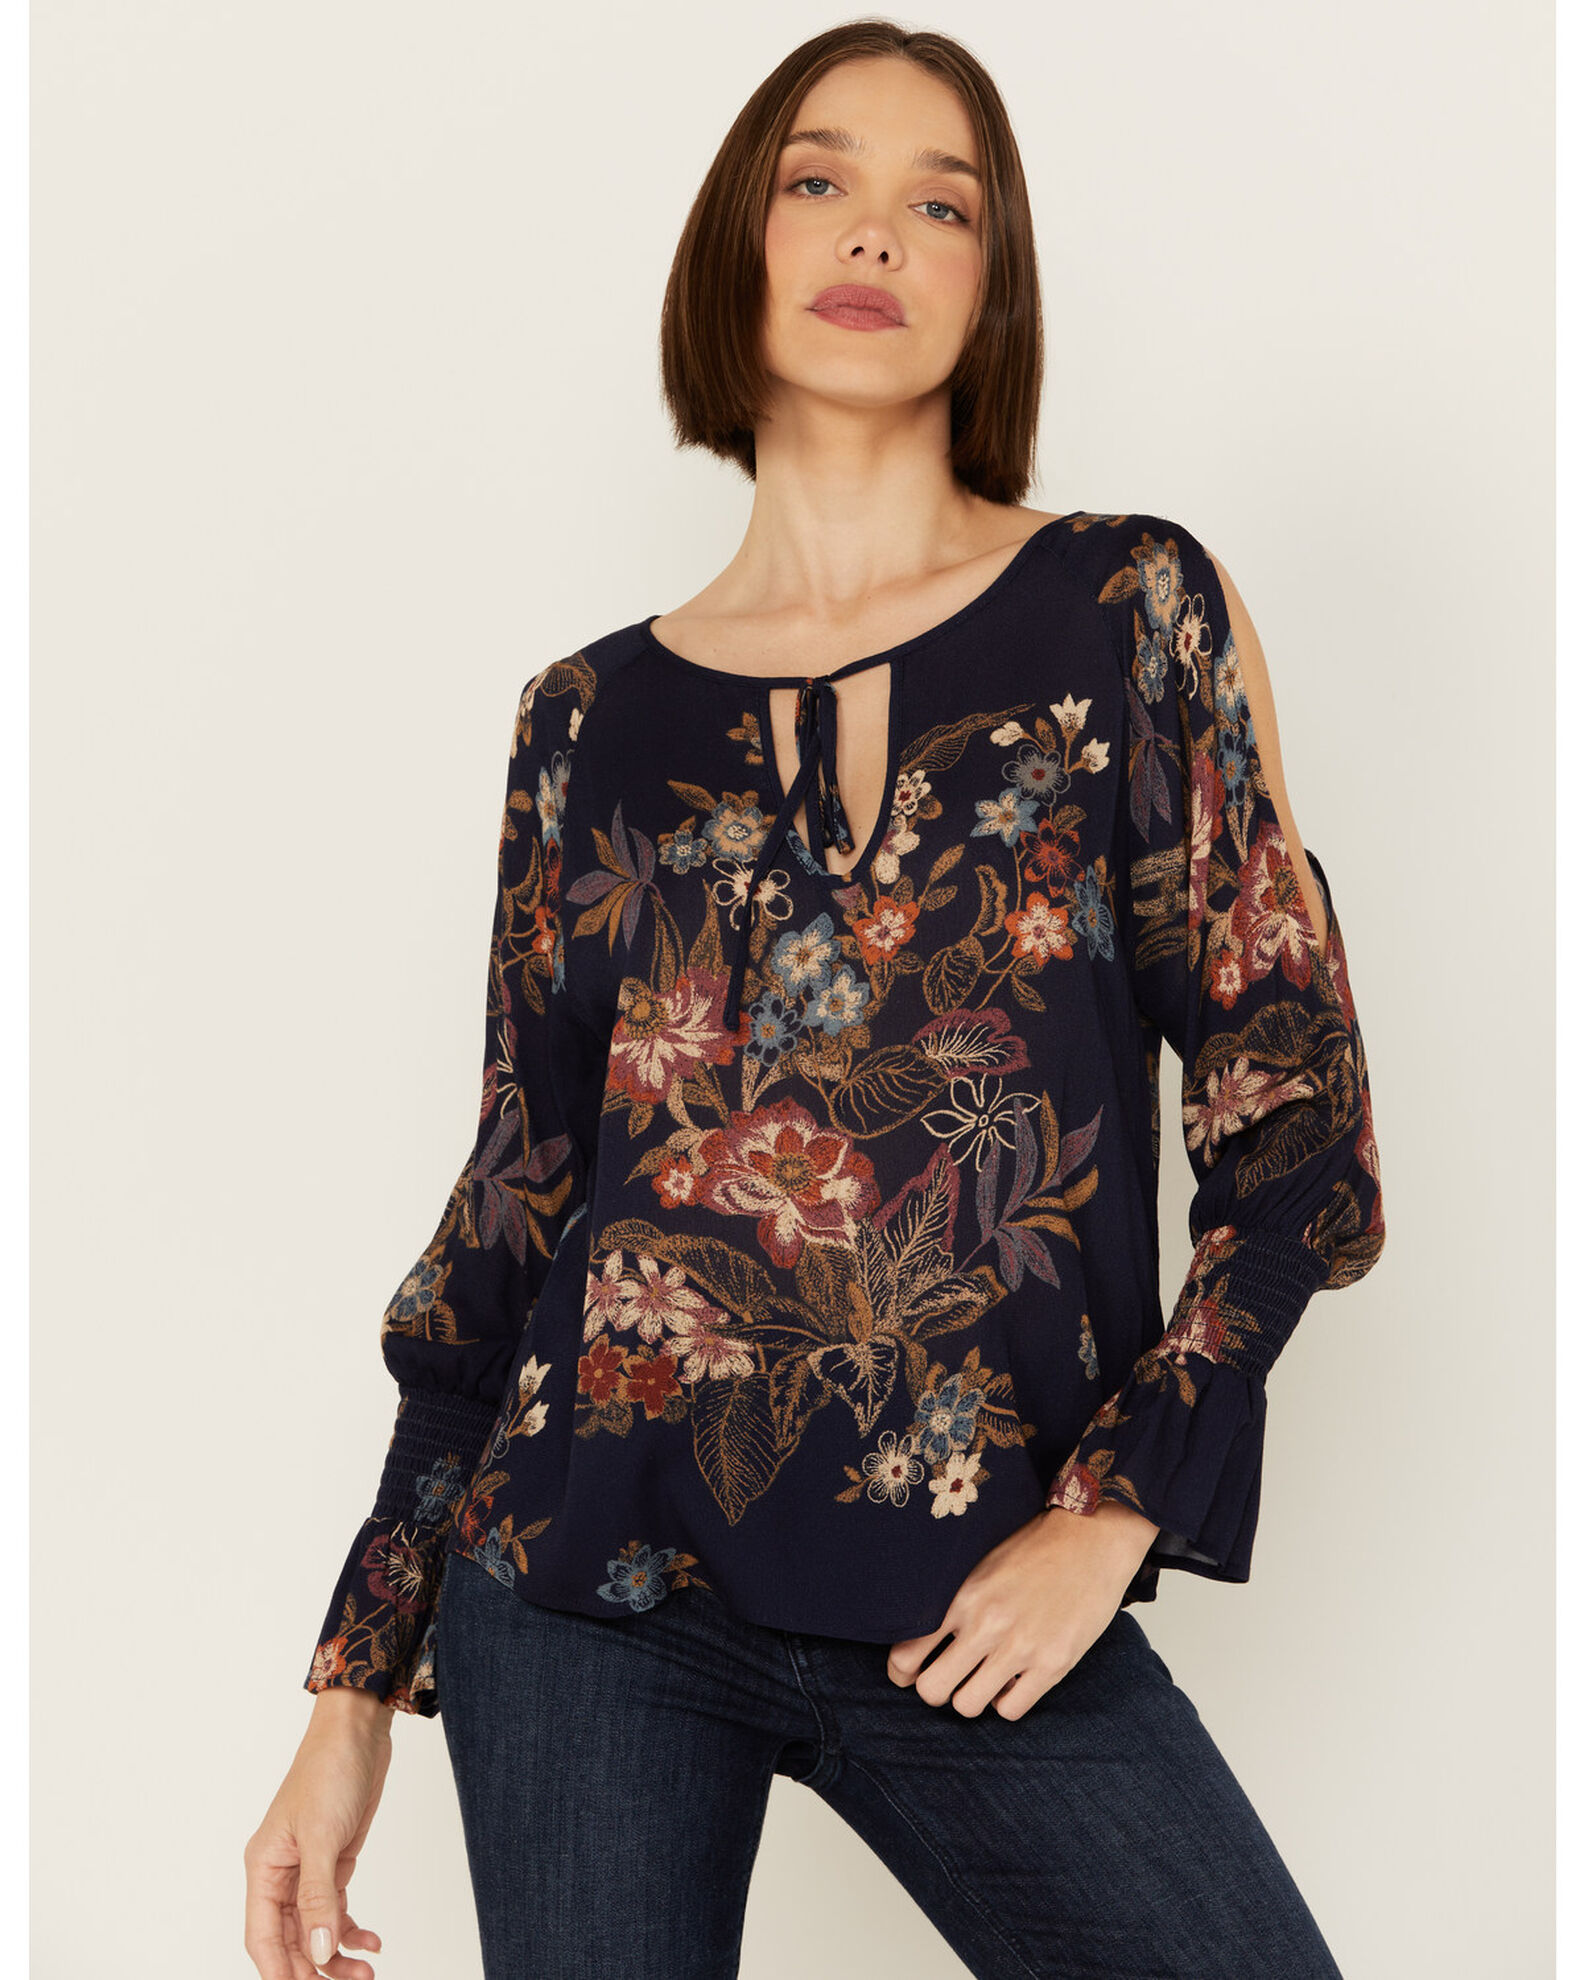 Wild Moss Women's Floral Printed Cold Shoulder Top